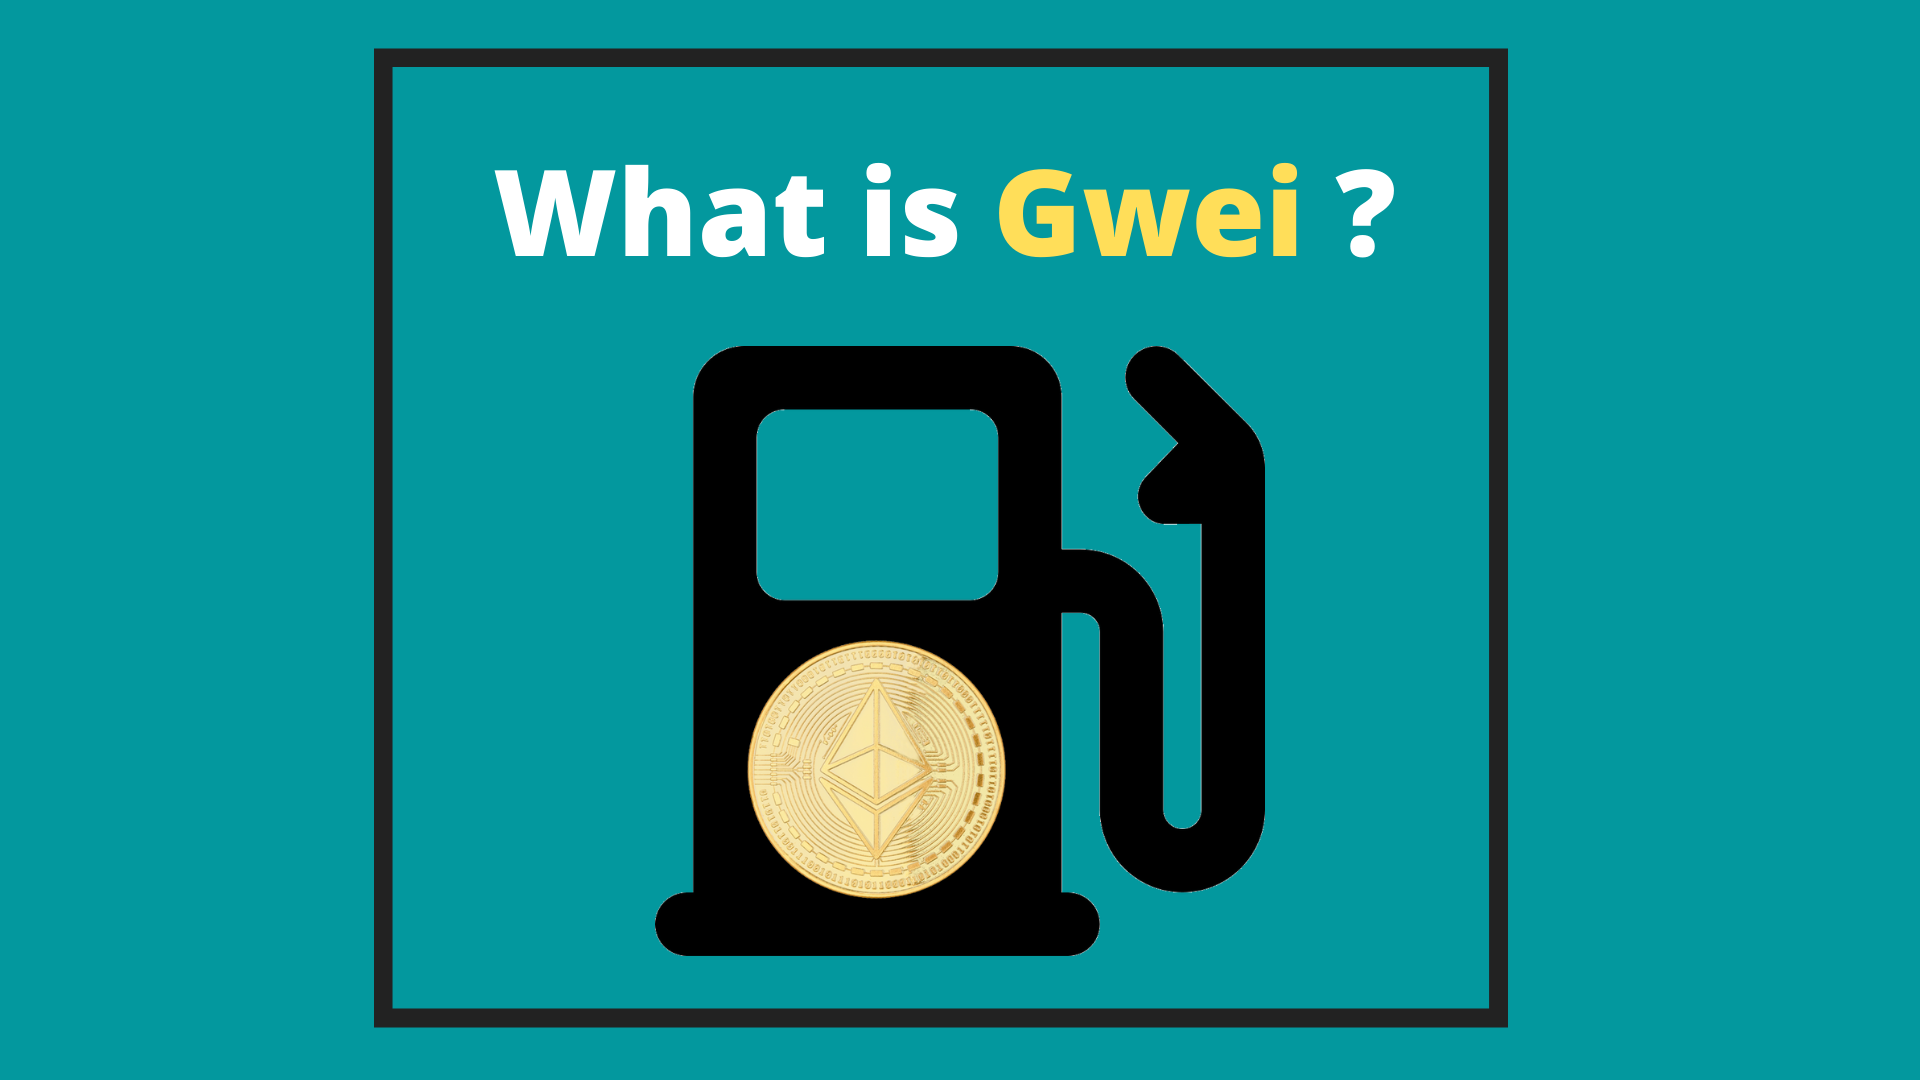 What is Gwei